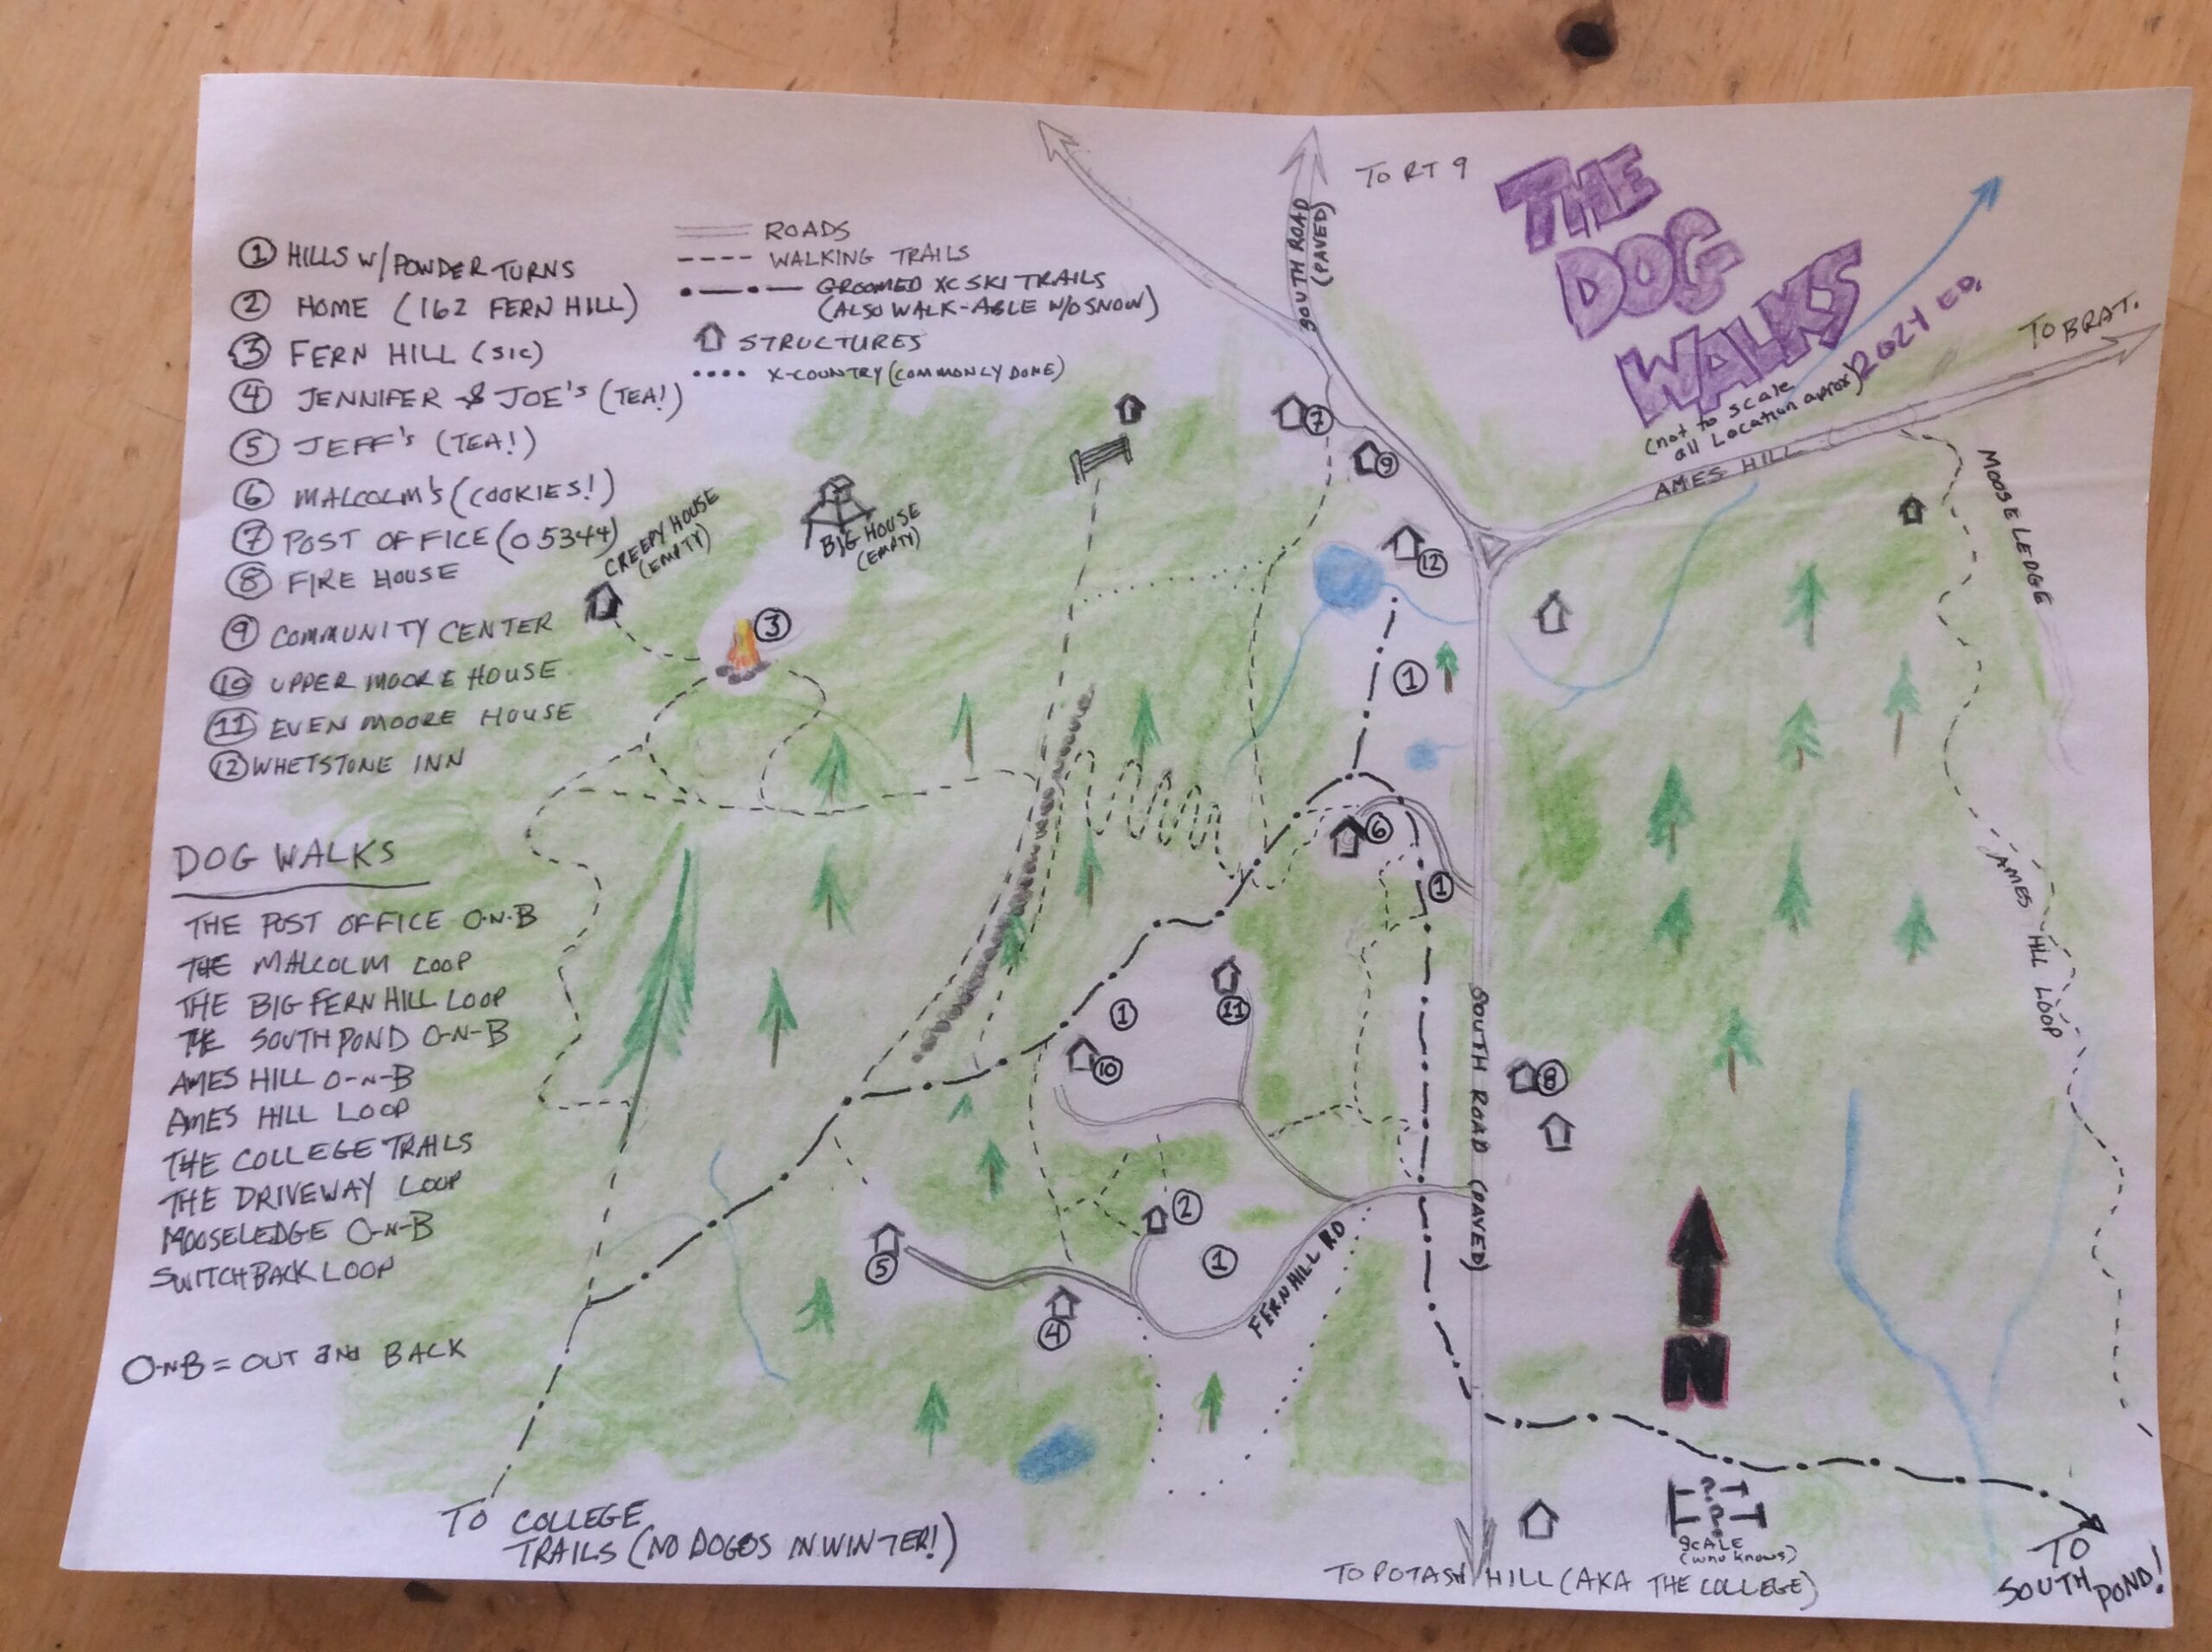 Graphic shows a hand drawn map of locations around Fern Hill that the author often walks with Cora The Dog